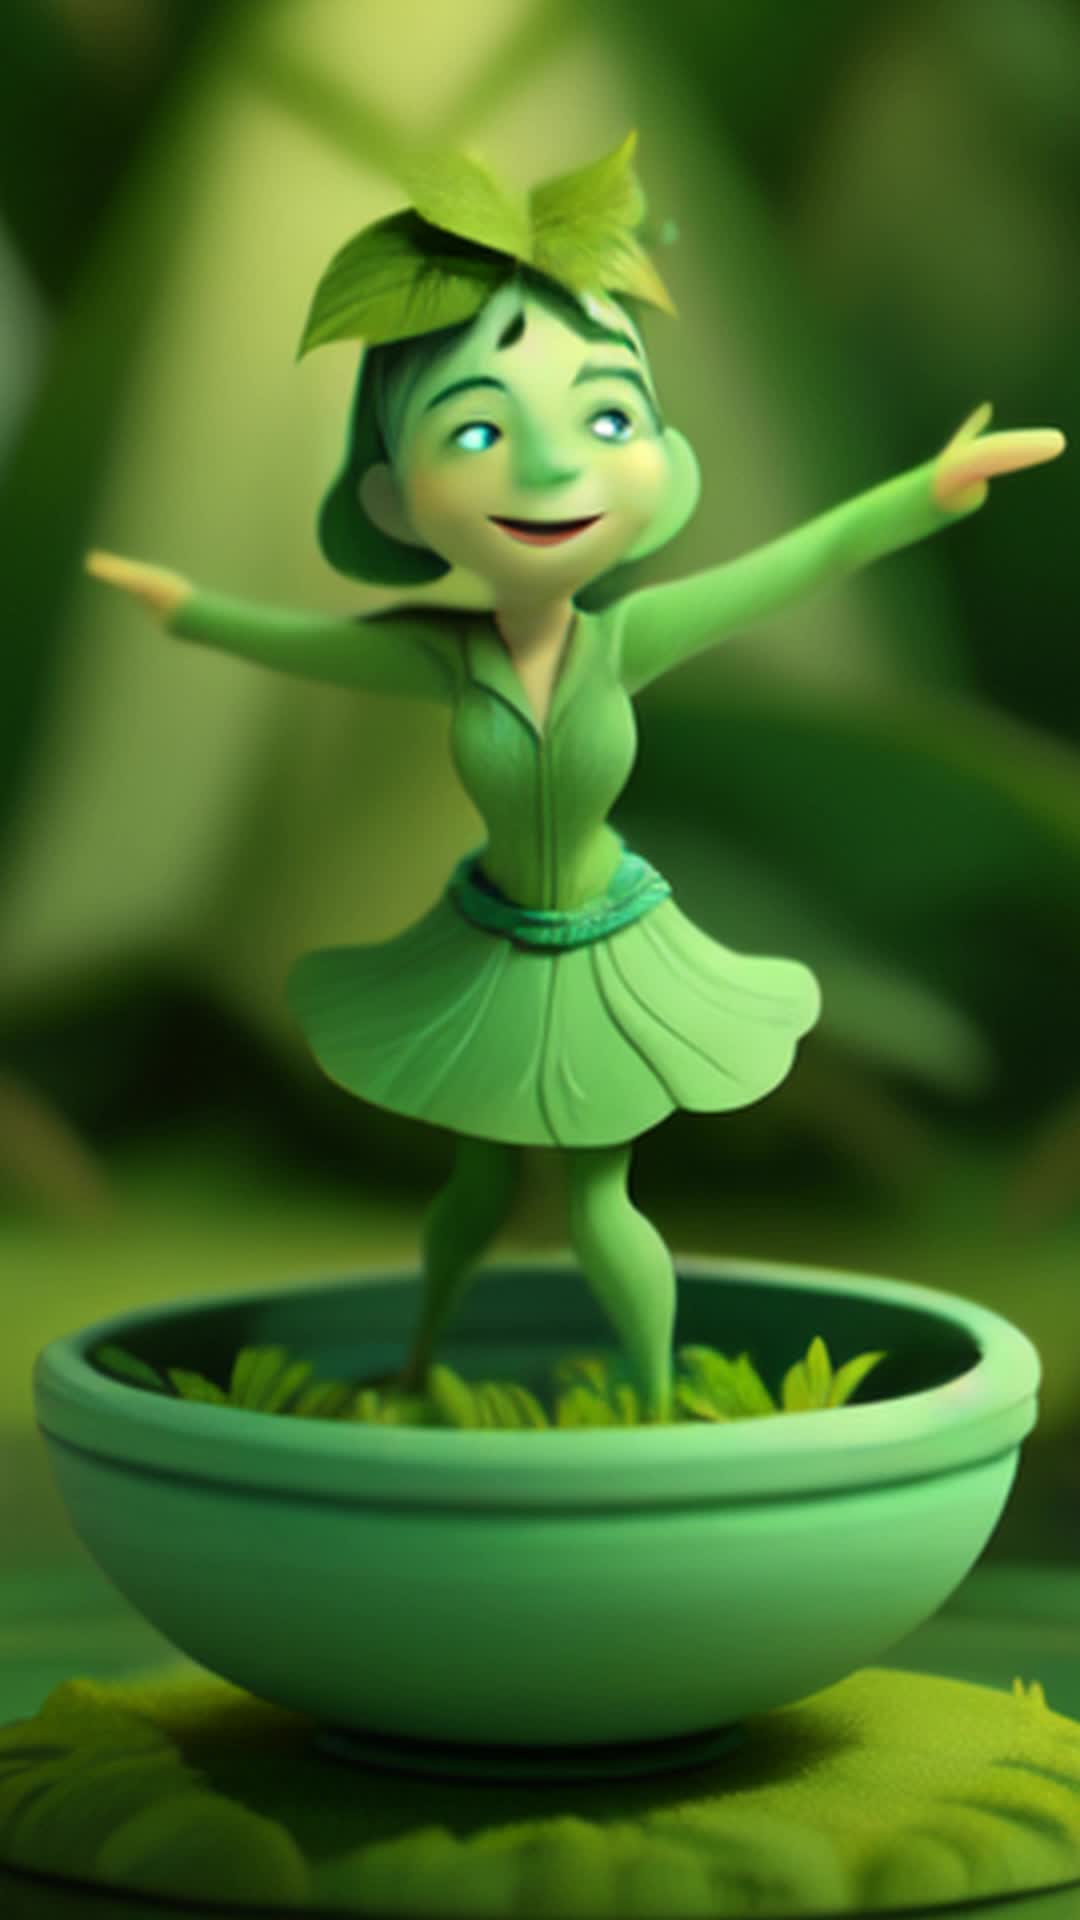 A whimsical miniature figure, crafted from a vibrant medley of green leaves, assumes a lively dancing pose atop a worn, earthy pot, surrounded by a lush forest scene awash in the soft, misty glow of rainkissed greens and blues, evoking a sense of mythical wonder and serenity, with delicate, intricate leaf veins resembling delicate brushstrokes, as tendrils of foliage swirl around the figure, blurring the lines between dancer and environment, against a backdrop of gentle, glistening raindrops